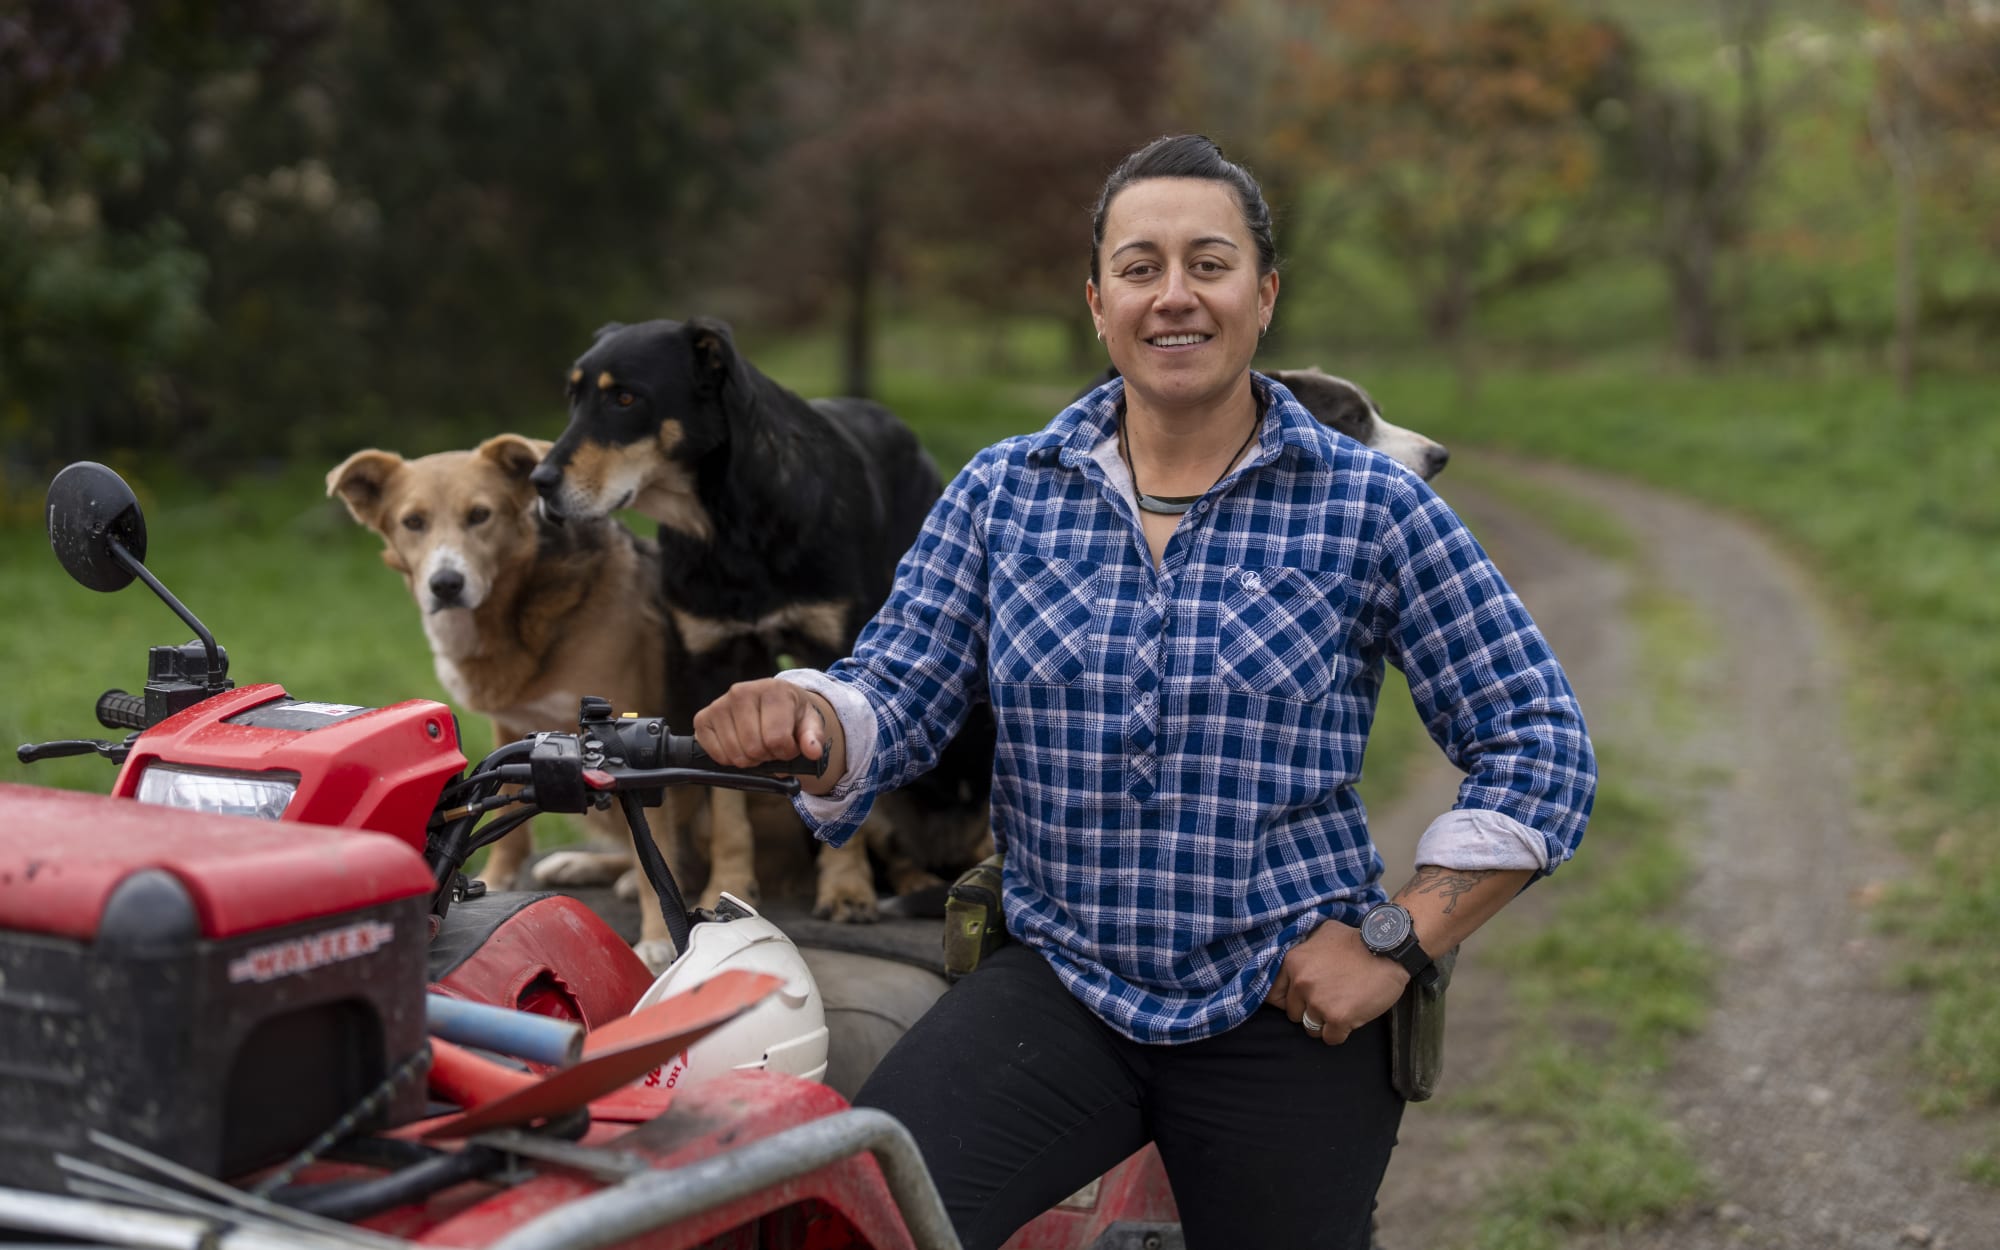 Chloe Butcher-Herries, Napier

Ahuwhenua Trophy - Young Maori Farmer - Excellence in Māori Farming Award 2022. May 2022. Photo by alphapix.nz

CONDITIONS of USE:

FREE for editorial use in direct relation the Ahuwhenua Trophy competition. ie. not to be used for general stories about the finalist or farming.

NO archiving of images. NO commercial use. 
Please contact John@alphapix.co.nz if you have any questions